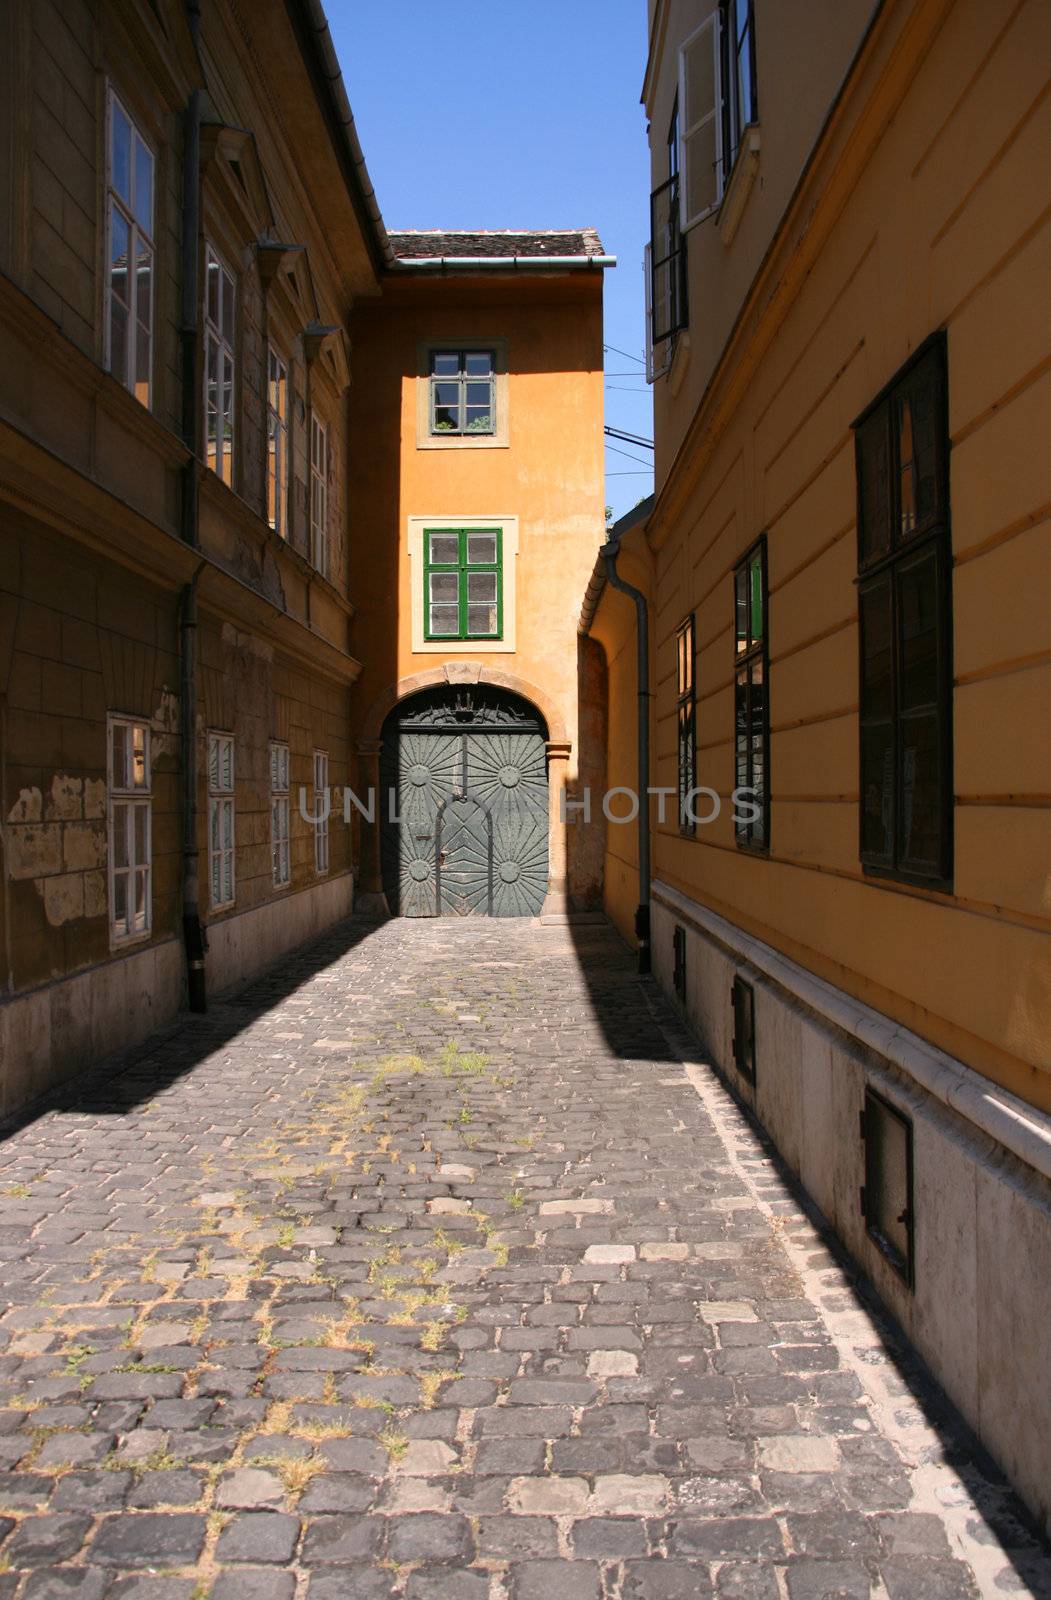 Quaint cobbled street in Budapest, Hungarian capital city.